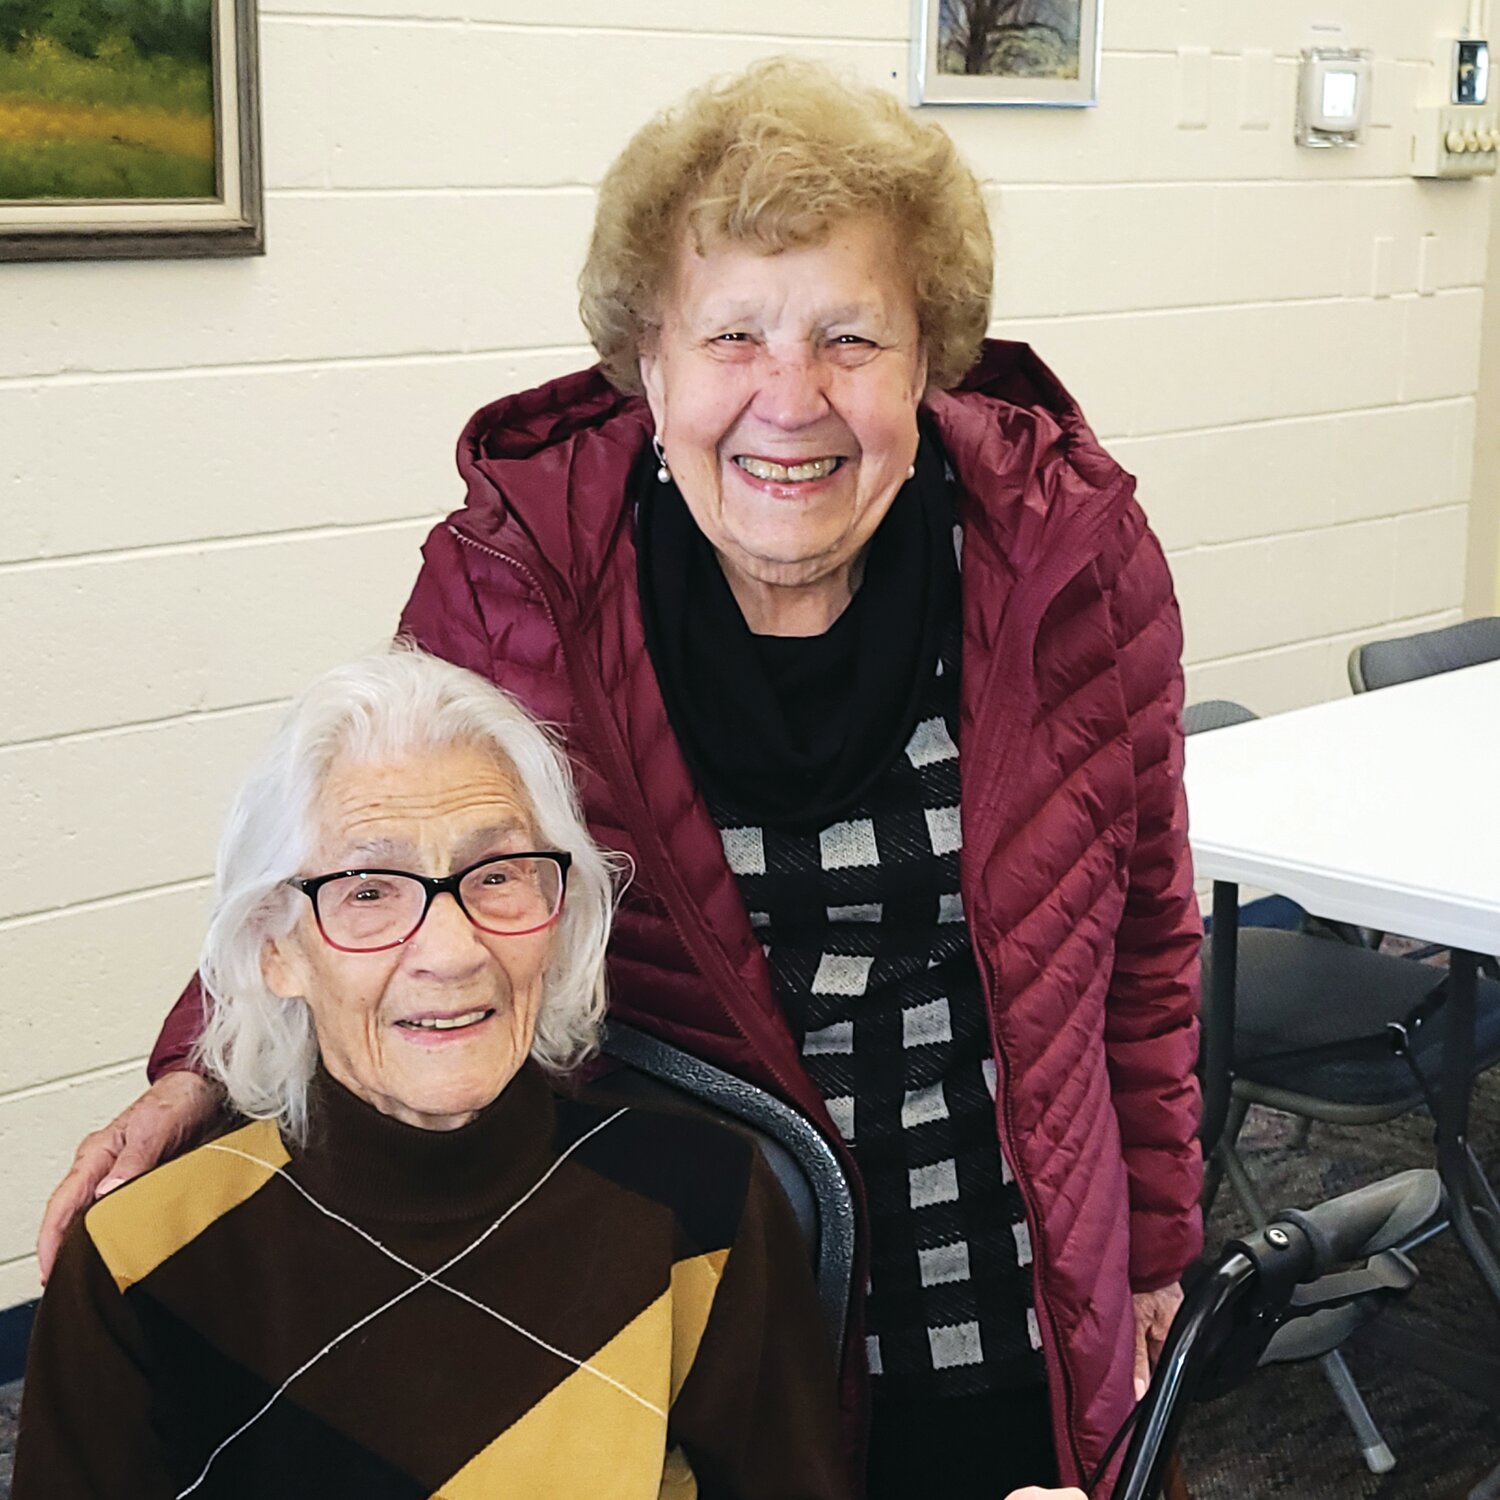 Elizabeth “Liz” Costello, seated, is welcomed into the Centenarian club by 101-year-old Catherine Longabucco following Costello’s  participation in the seated exercise class at the Central Bucks Senior Activity Center.